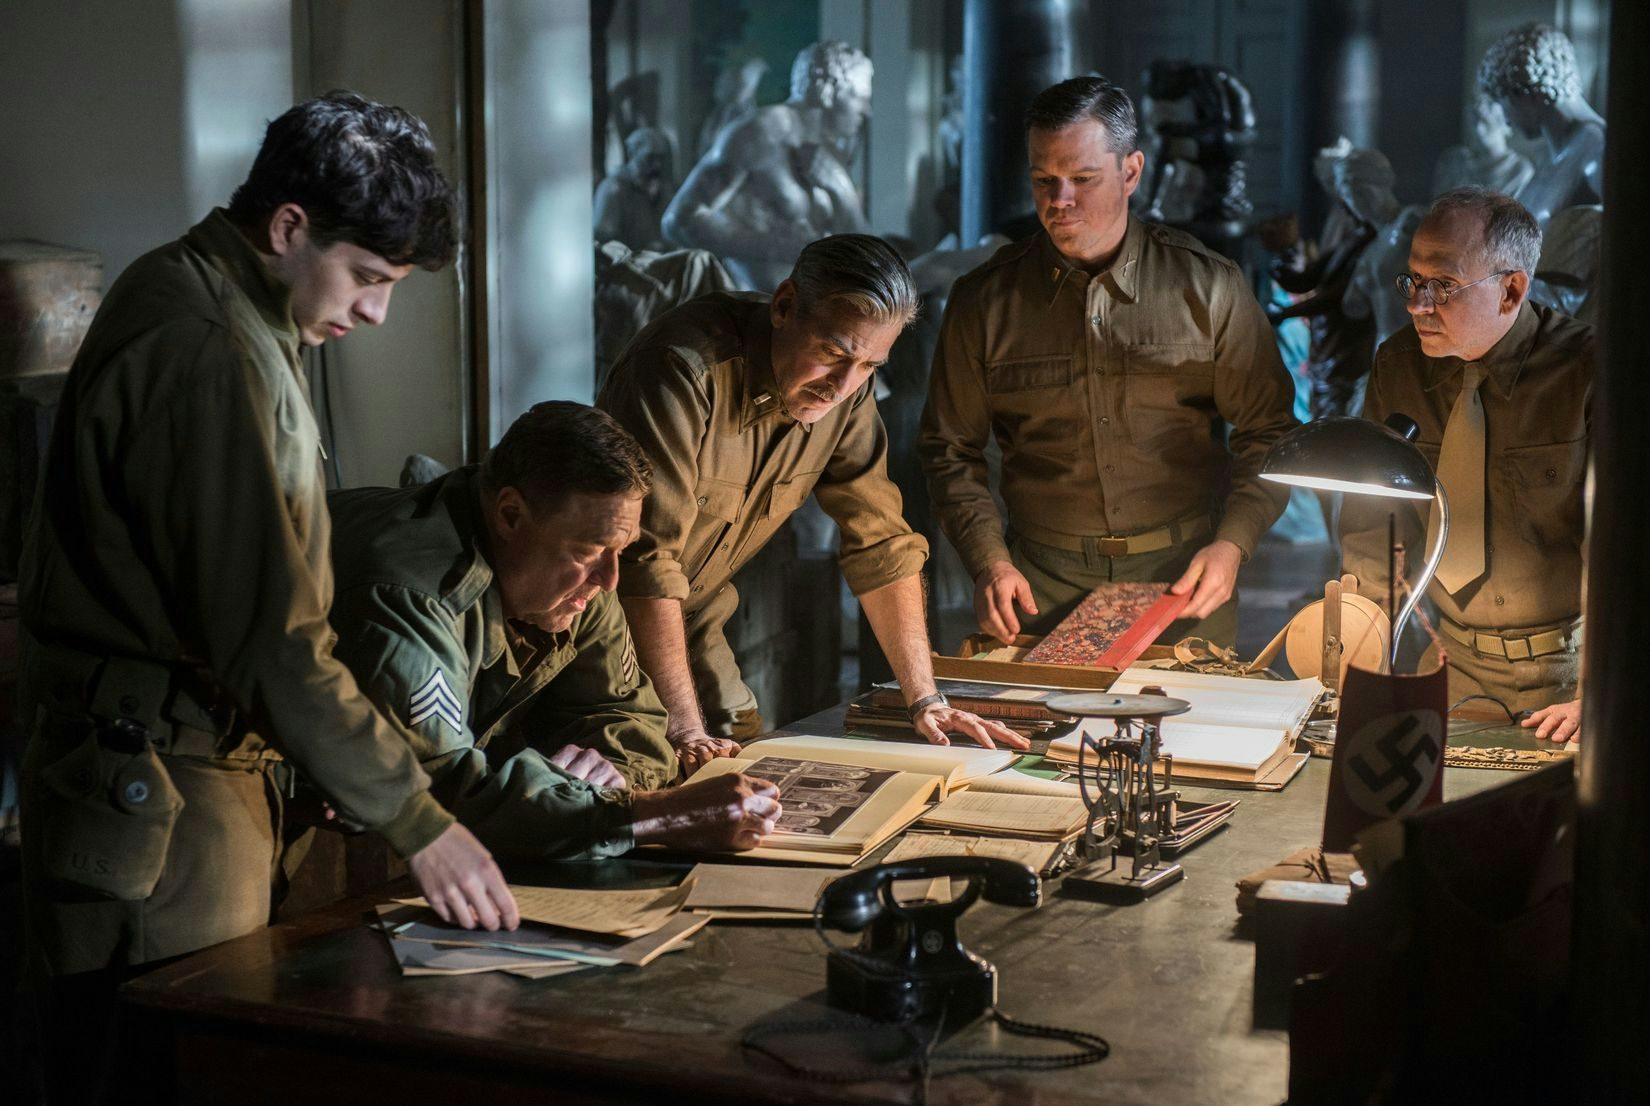 A group of the monuments men / soldiers around a table in The Monuments Men.